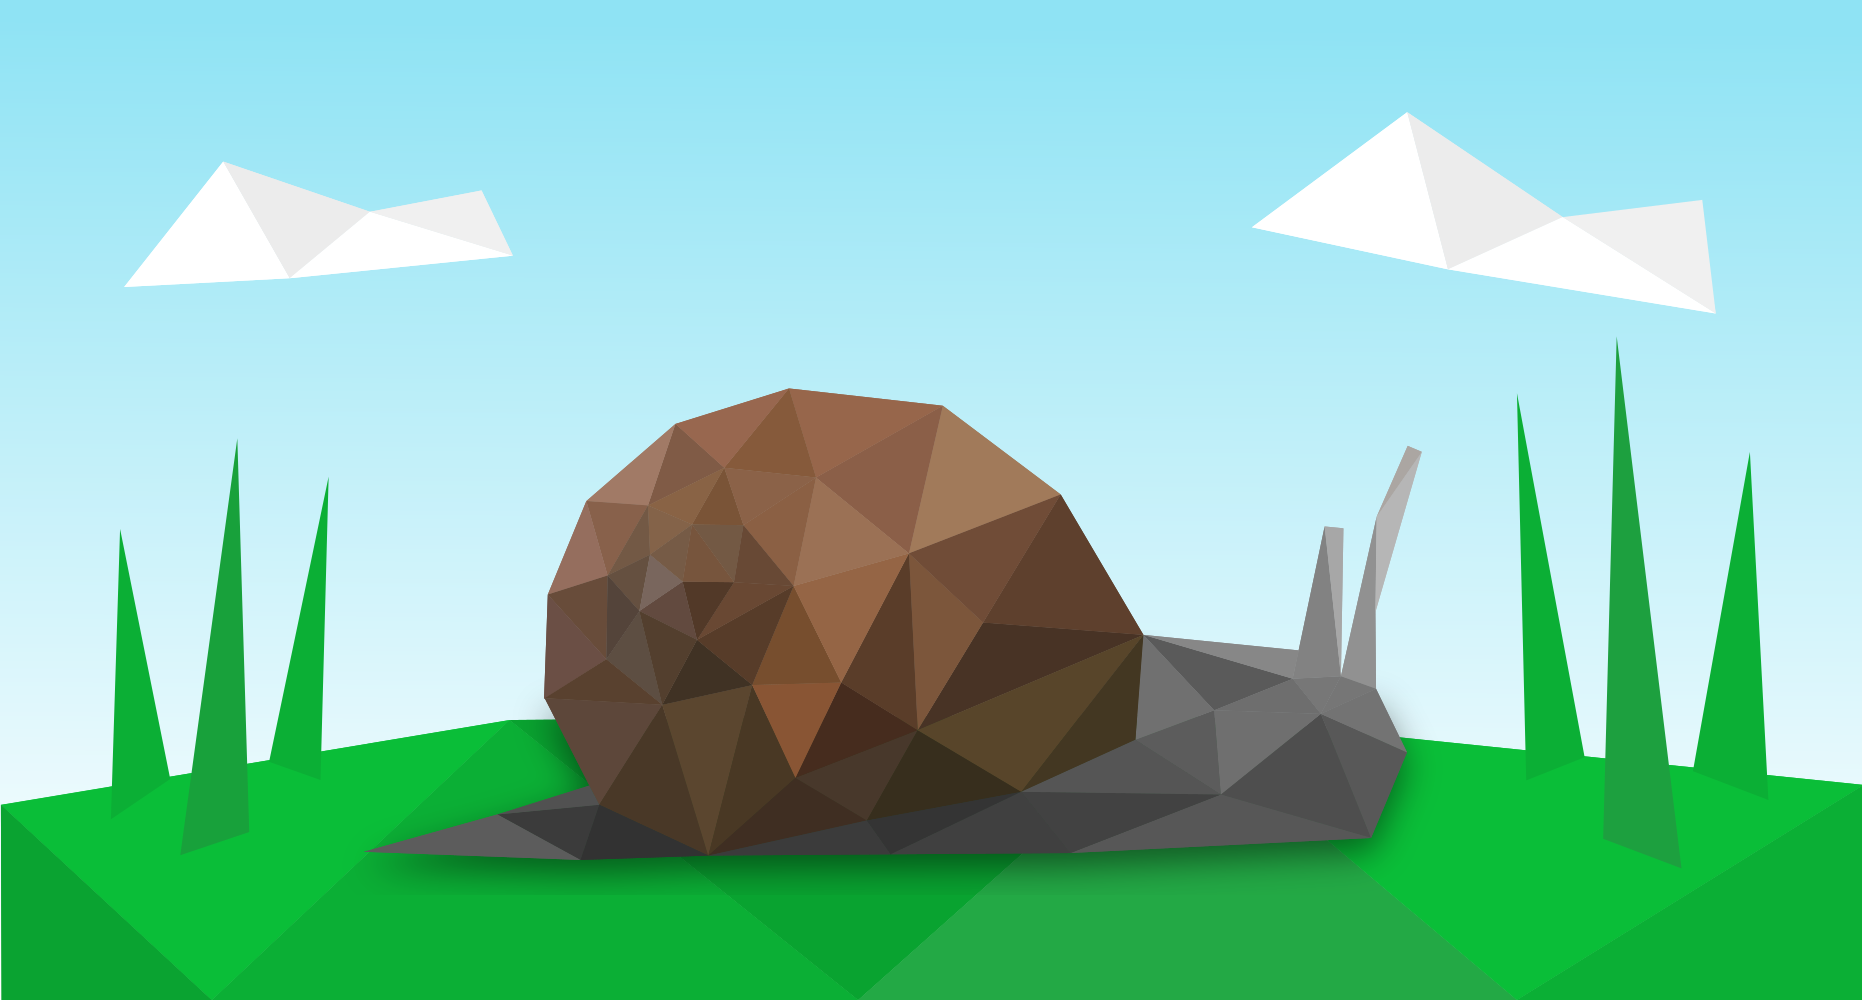 A low poly snail in low poly grass